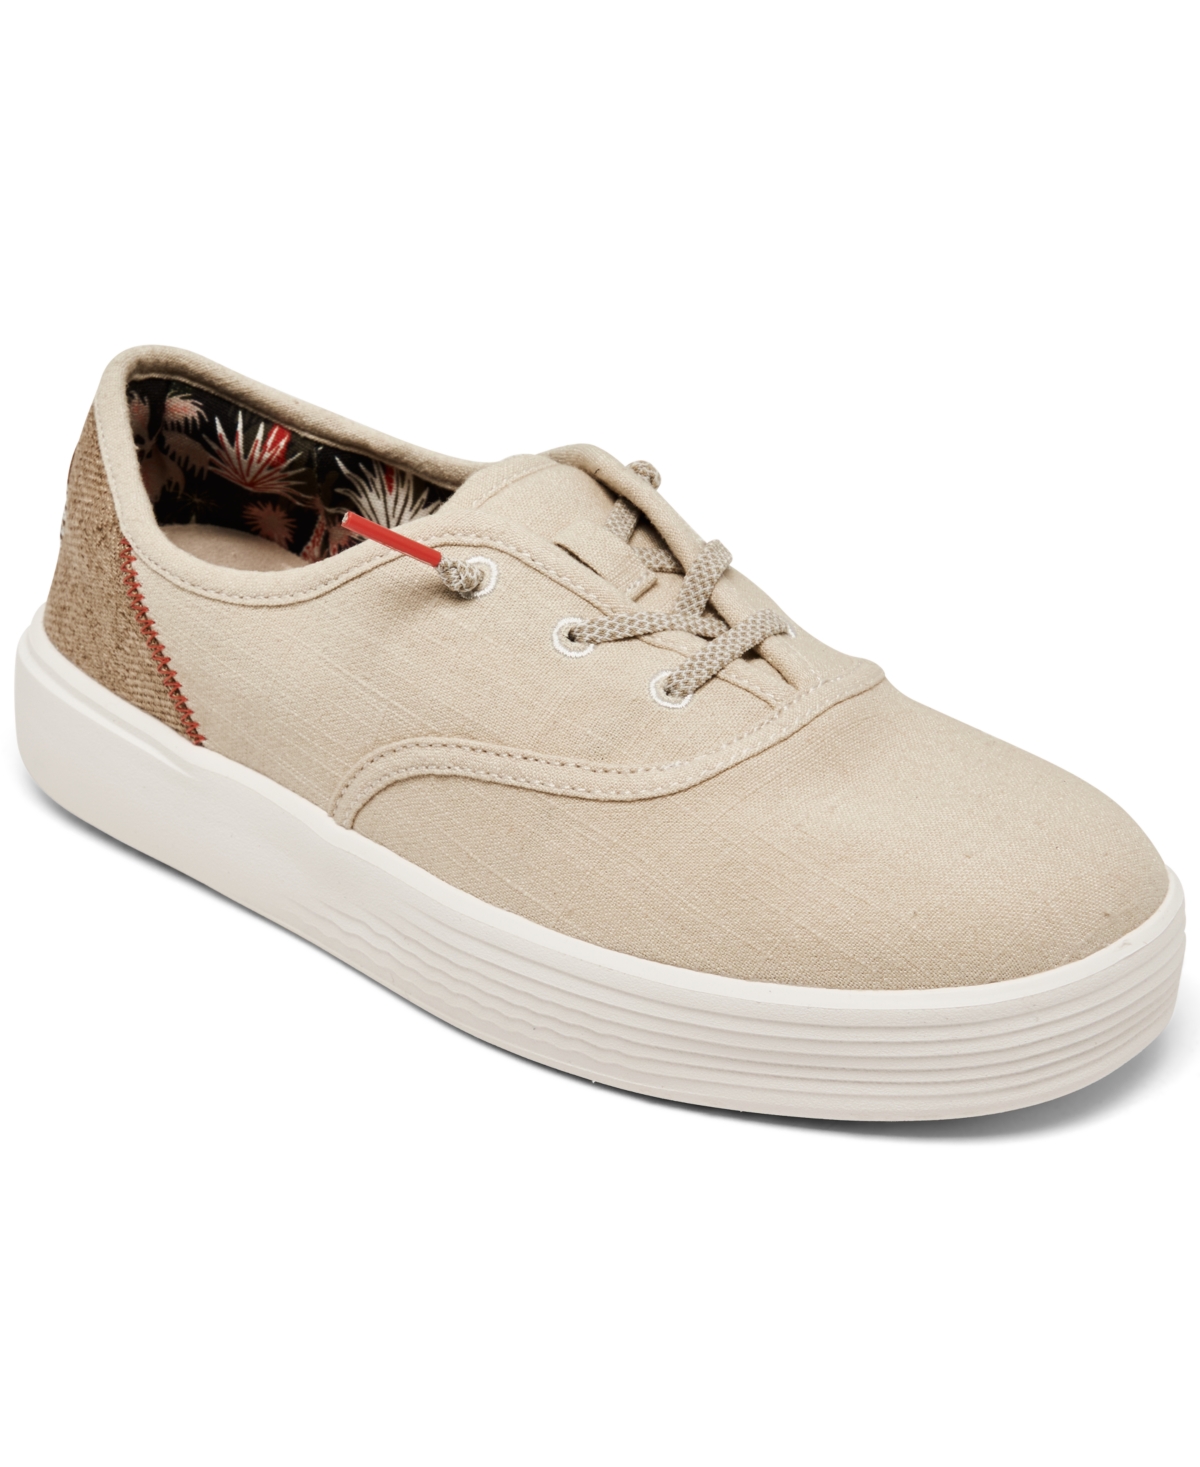 Women's Cody Craft Casual Sneakers from Finish Line - White